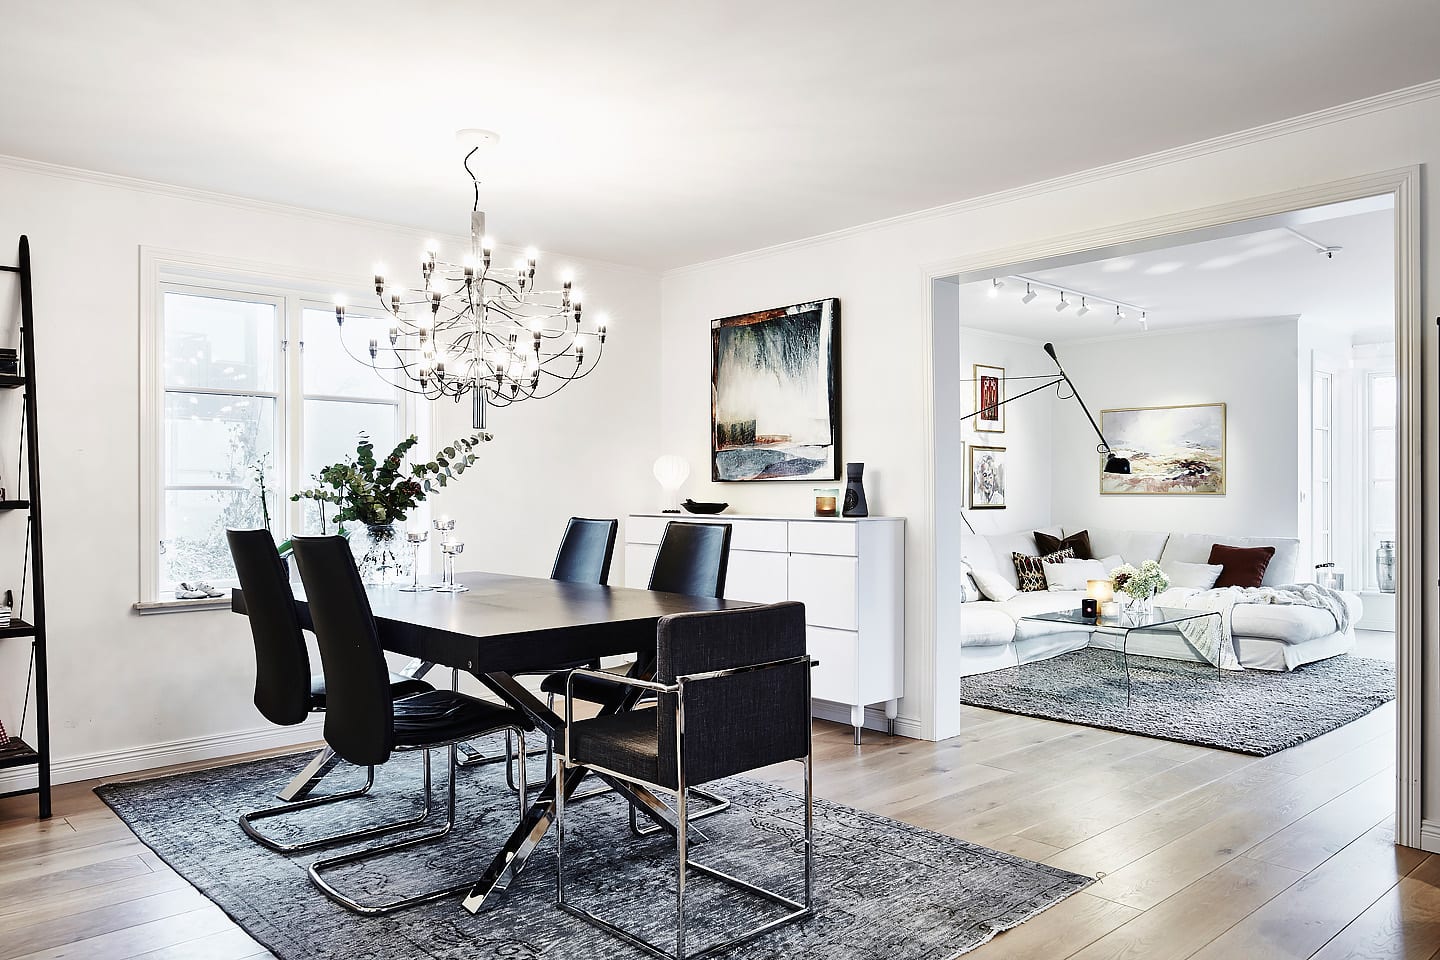 Scandinavian style in the interior: 5 obligatory things